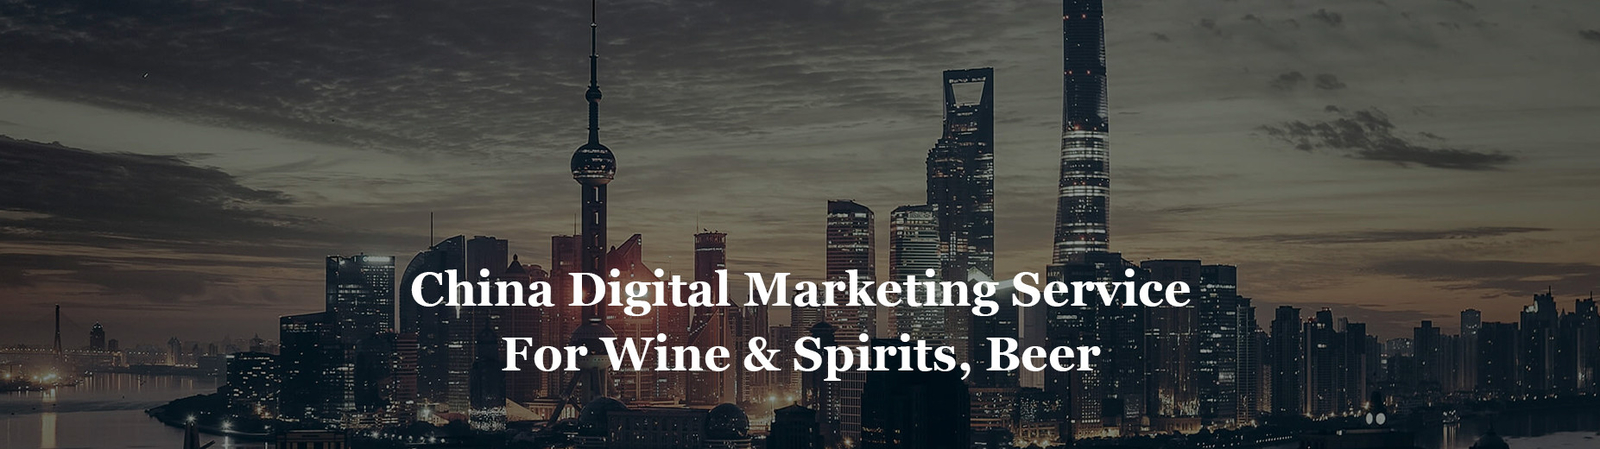 NZ Export Wine Industry In China Importers New Zealand Weibo Wechat Kol Promotion